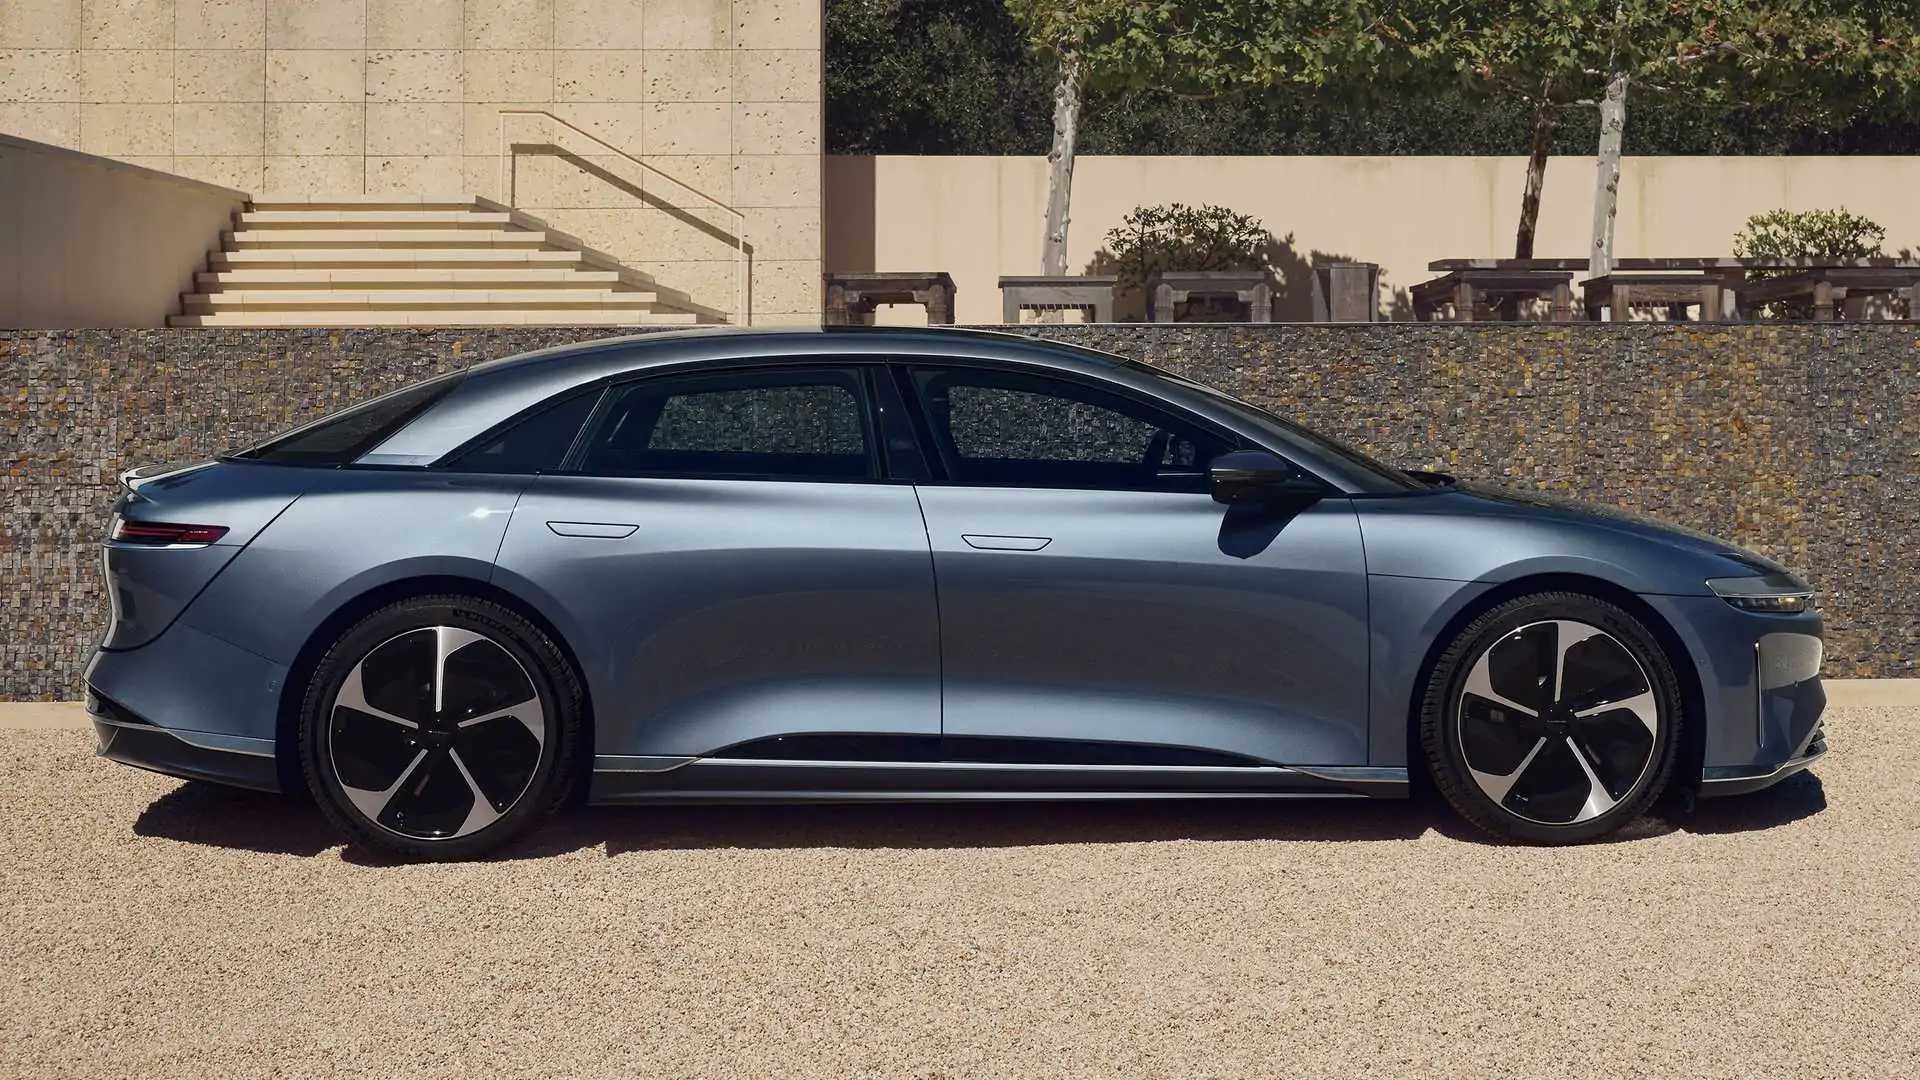 lucid air lineup sees big price cuts, pure awd now starts at $83,900